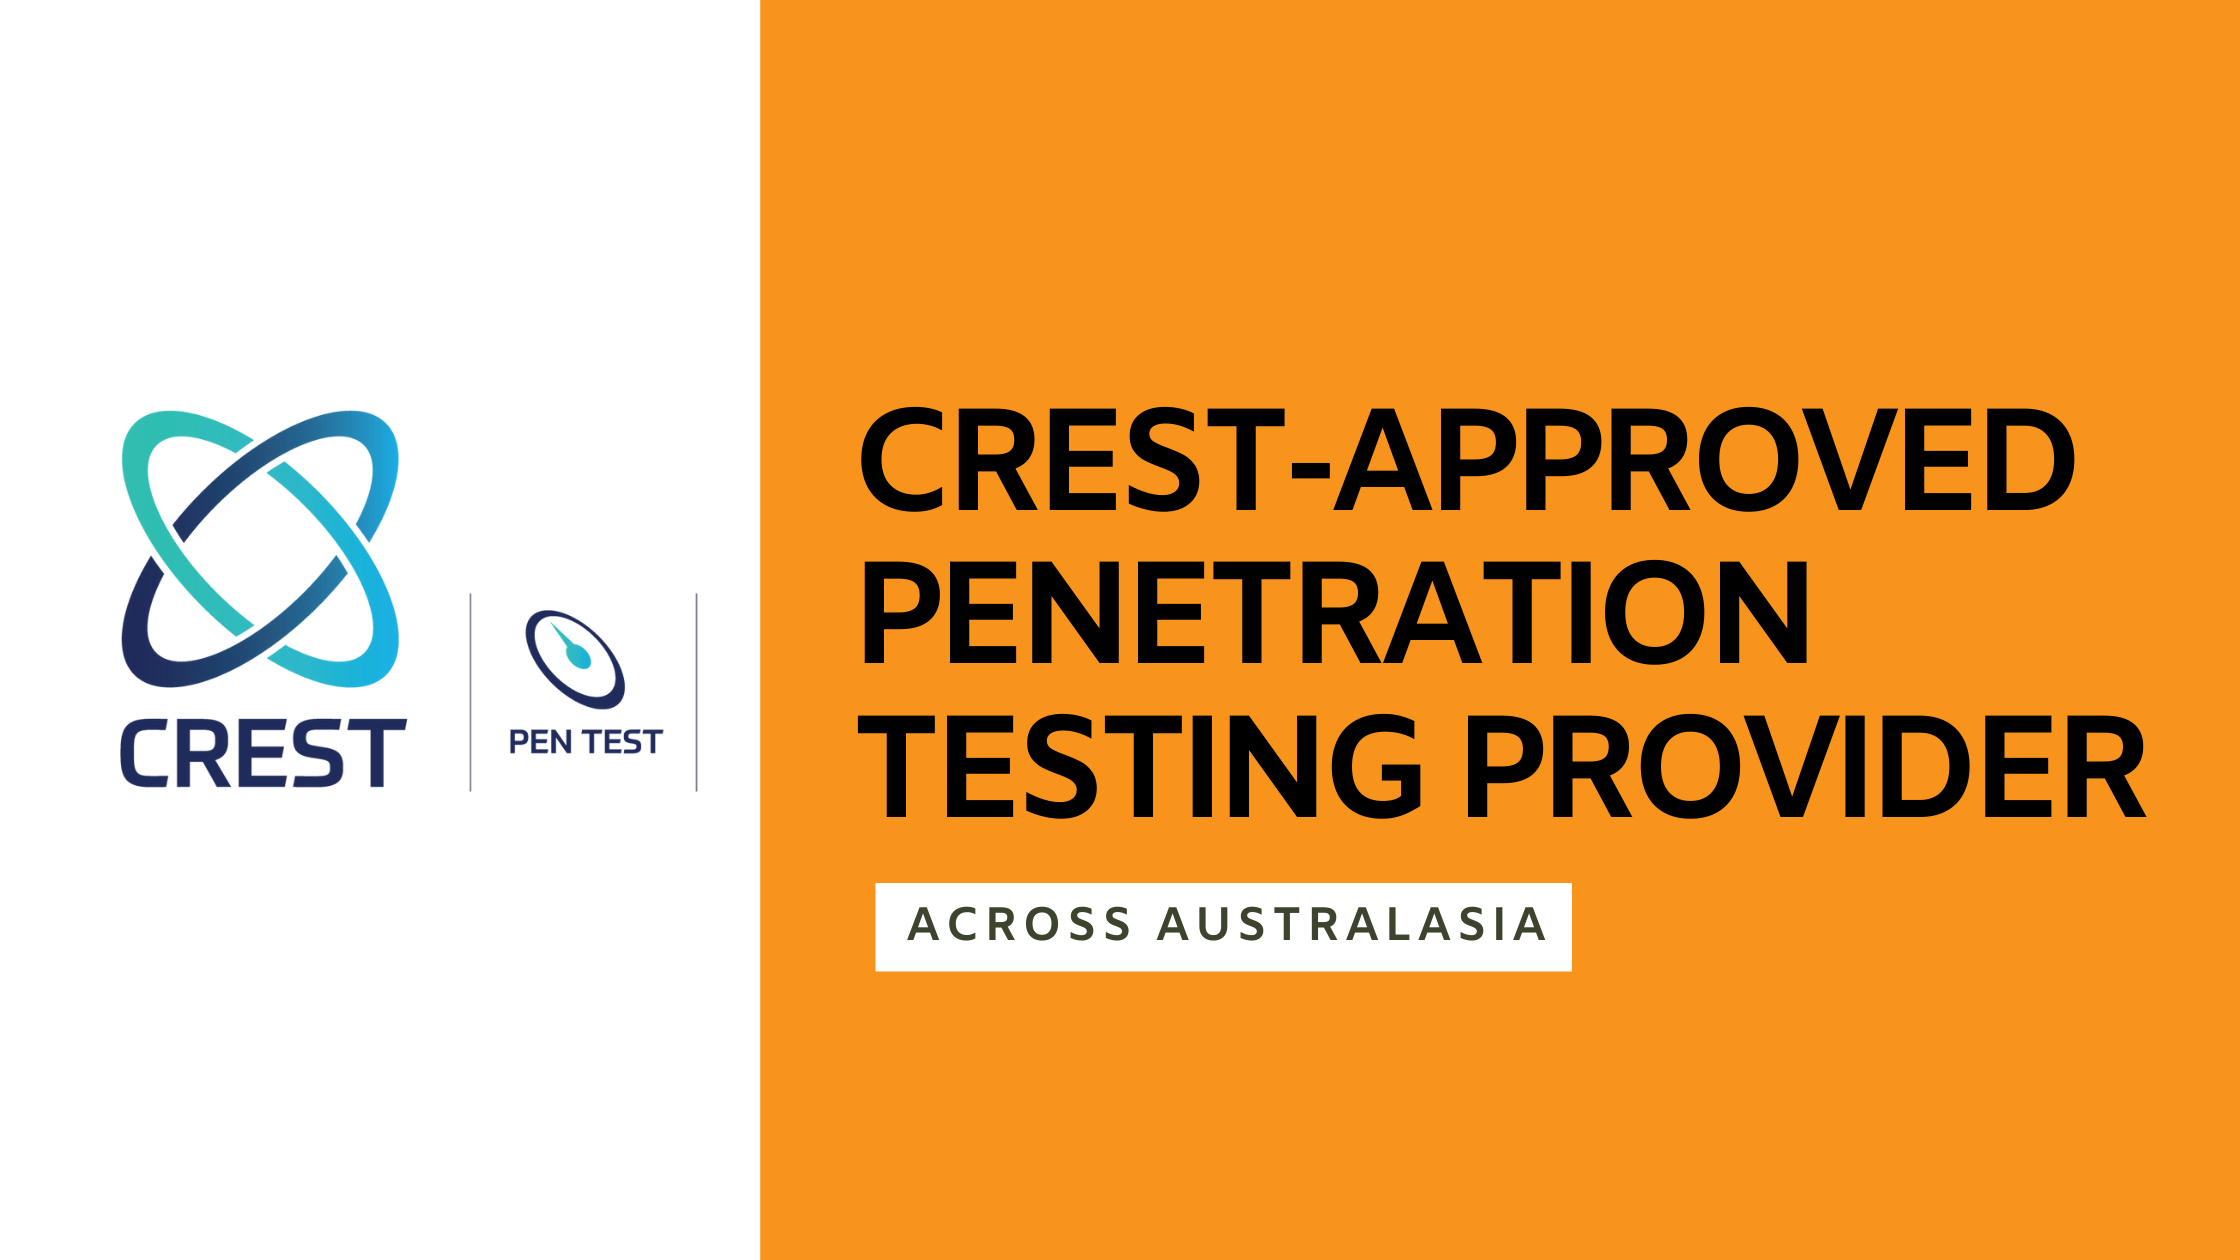 AMARU's penetrating testing services are CREST-certified